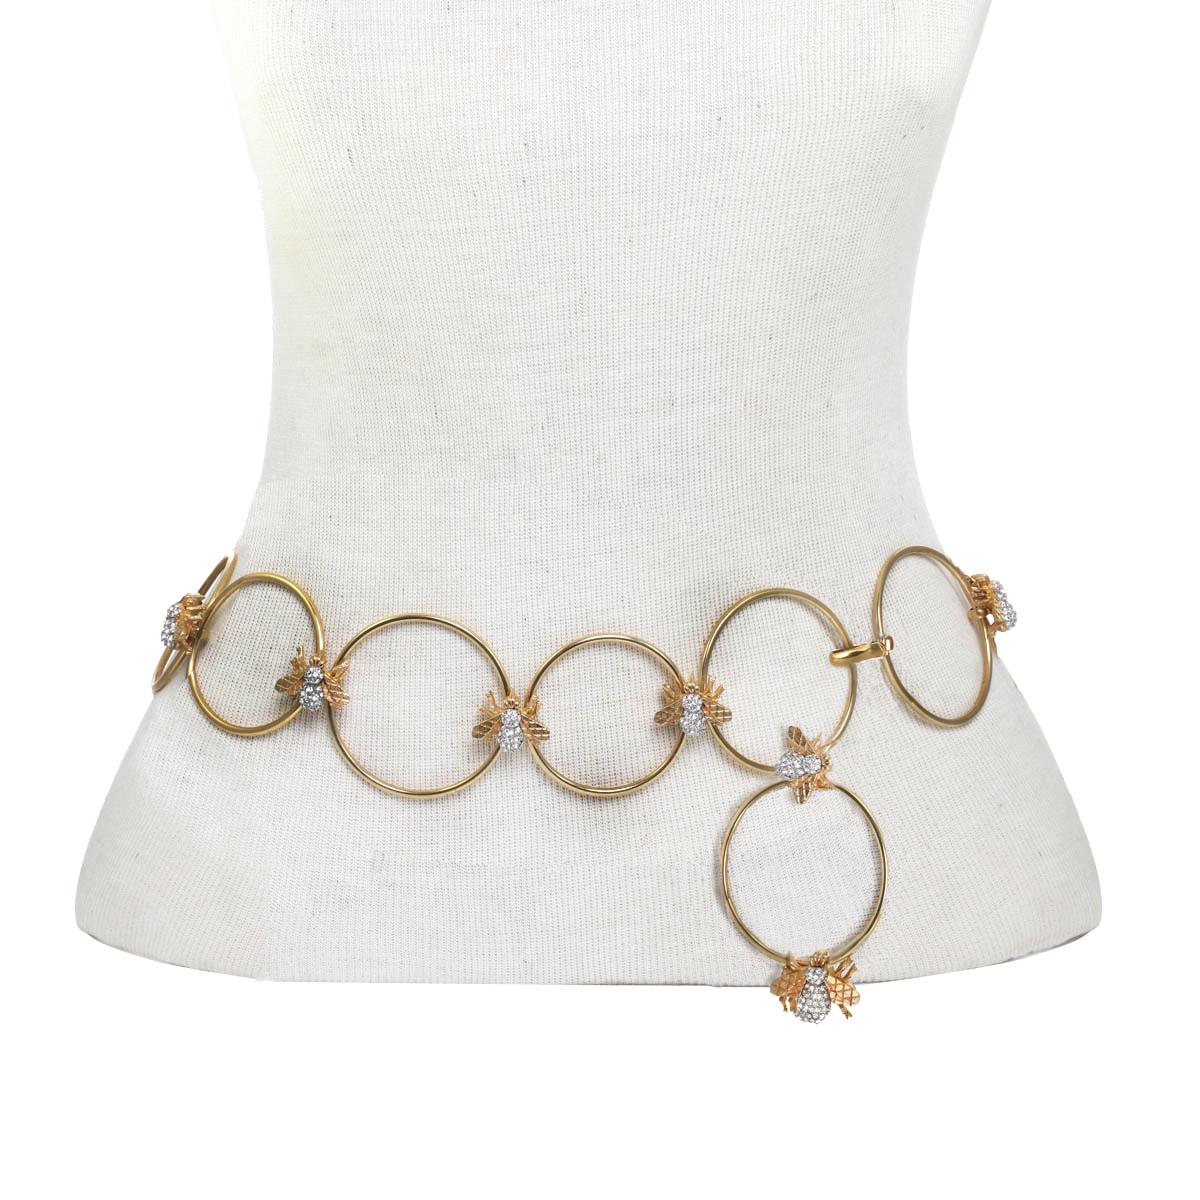 Beige Carolyne Roehm x CINER Crystal Bee Chain Belt Size: S/M For Sale